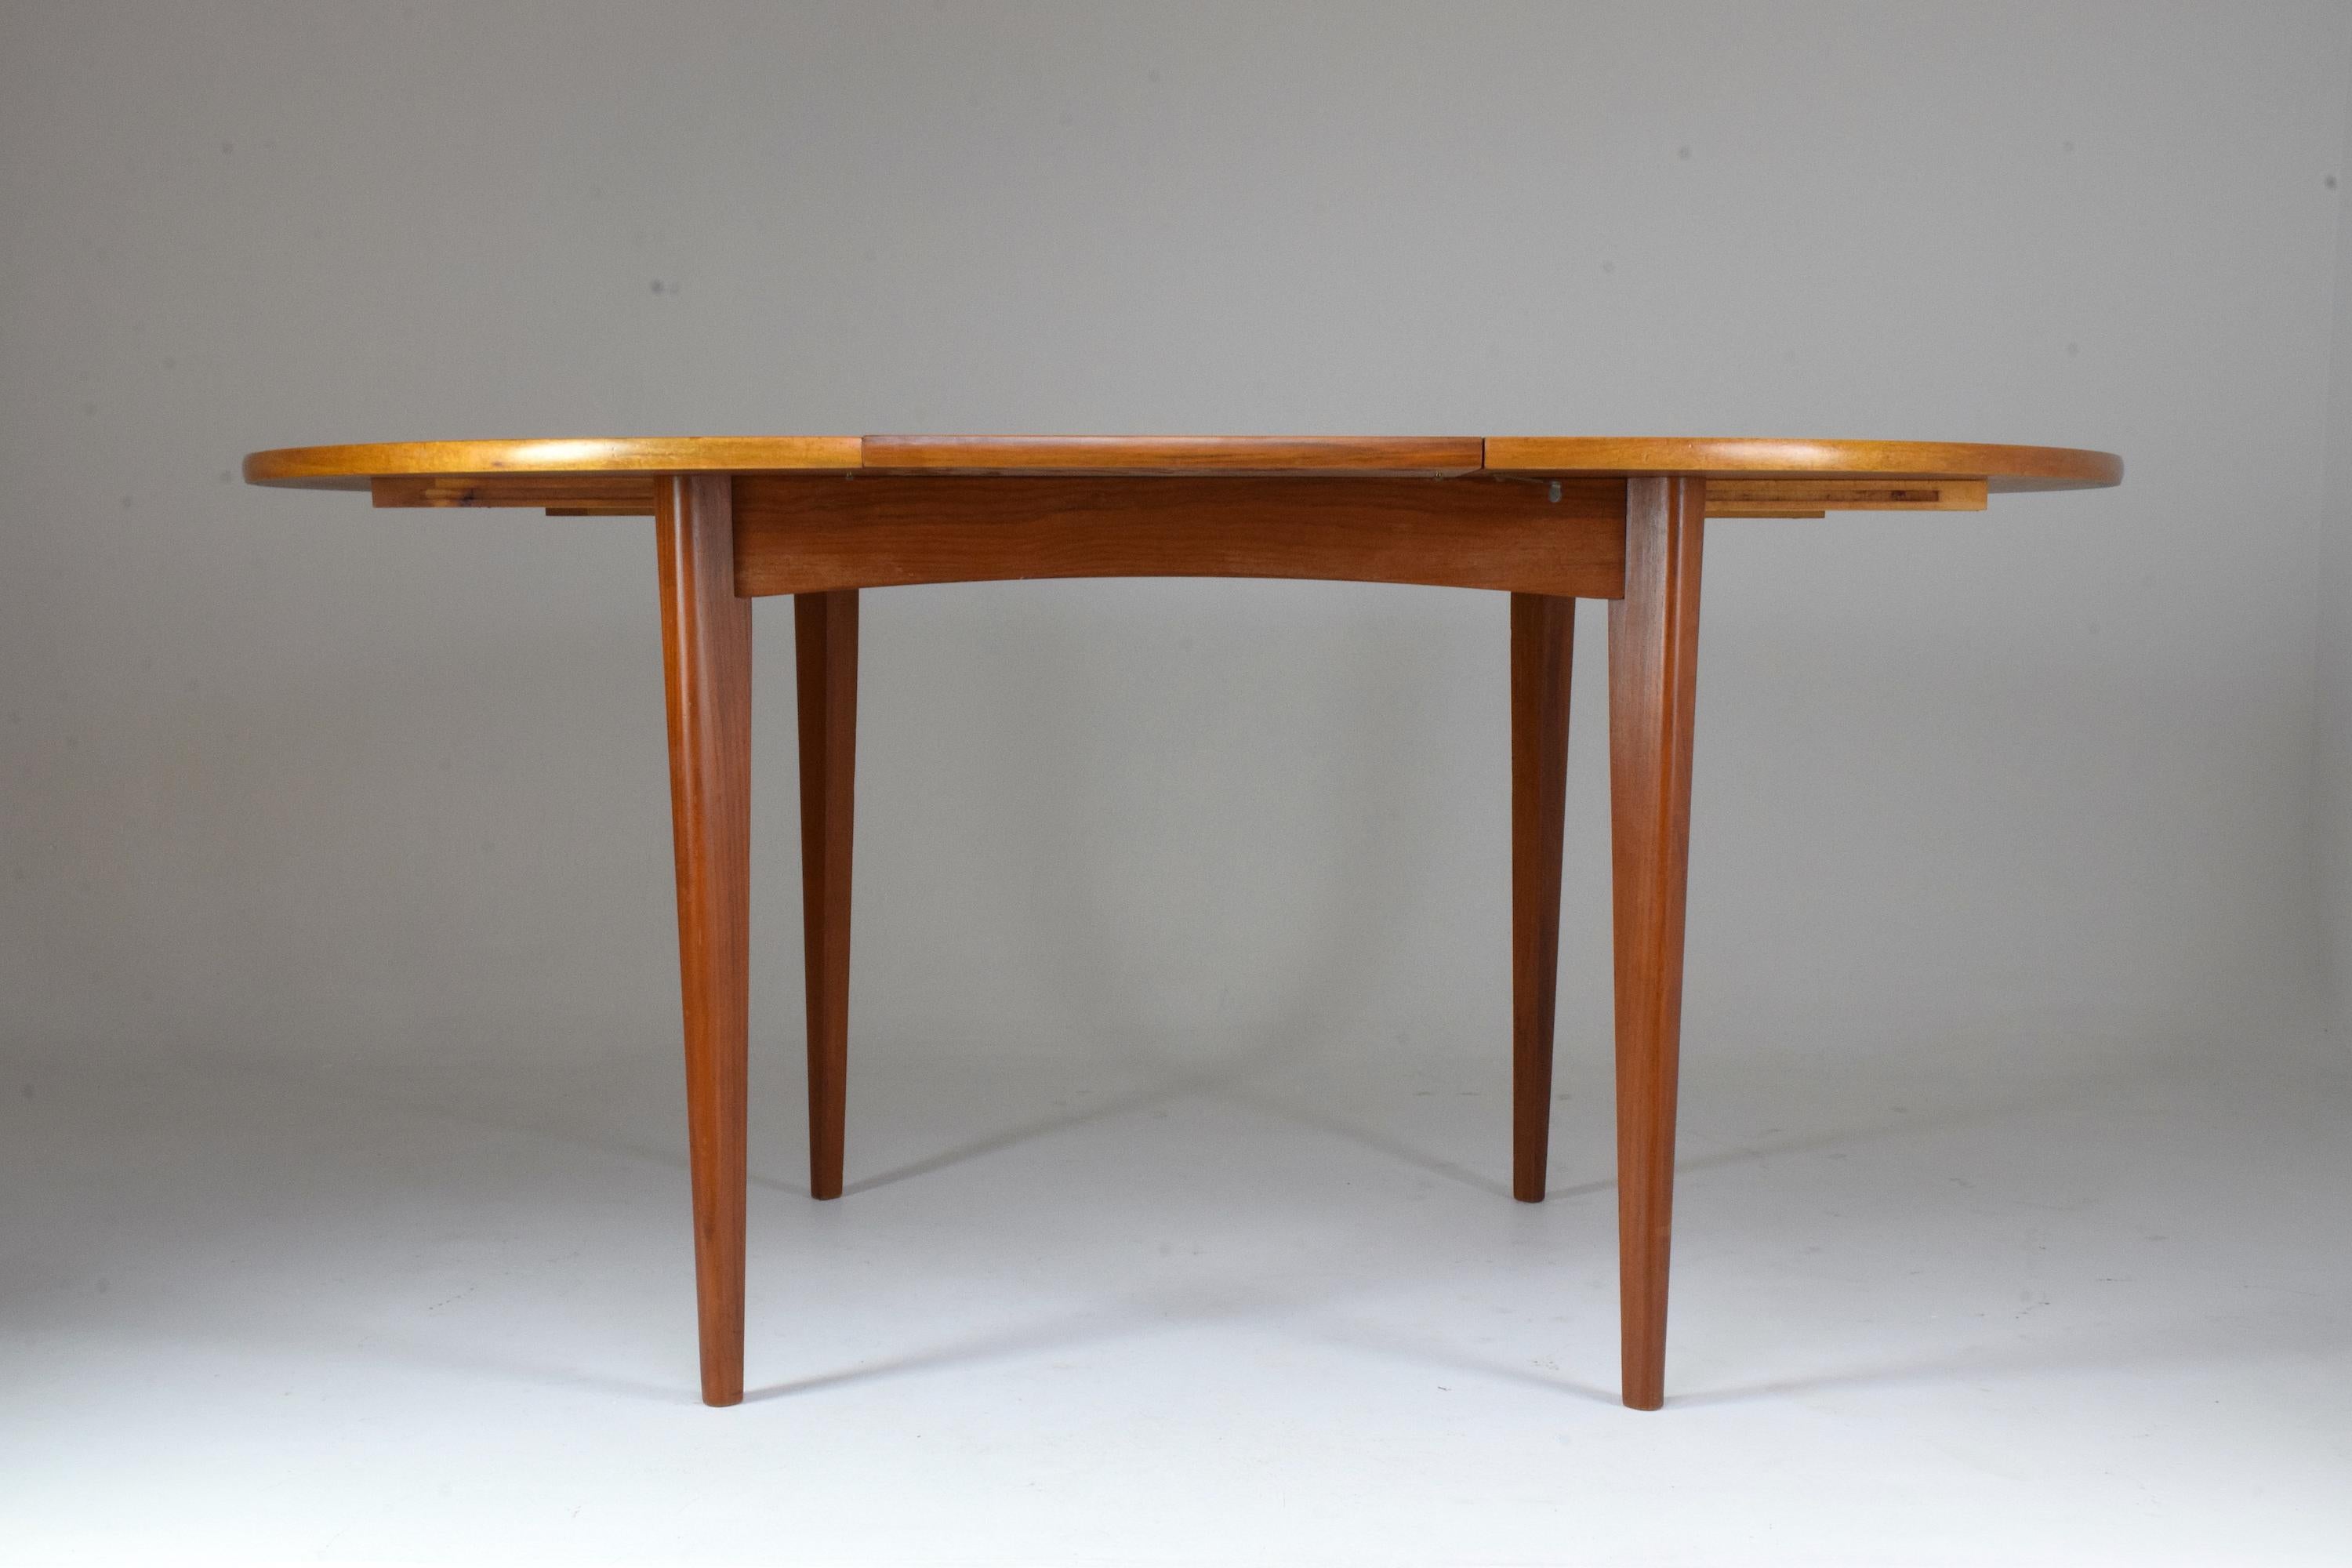 A Mid-Century Modern adjustable circular re-finished dining table of simple yet sophisticated Scandinavian style in solid teak sitting on tapered legs and fully functioning extensions. Fits 4 to 6 people. Useful for dining areas.

All our pieces are